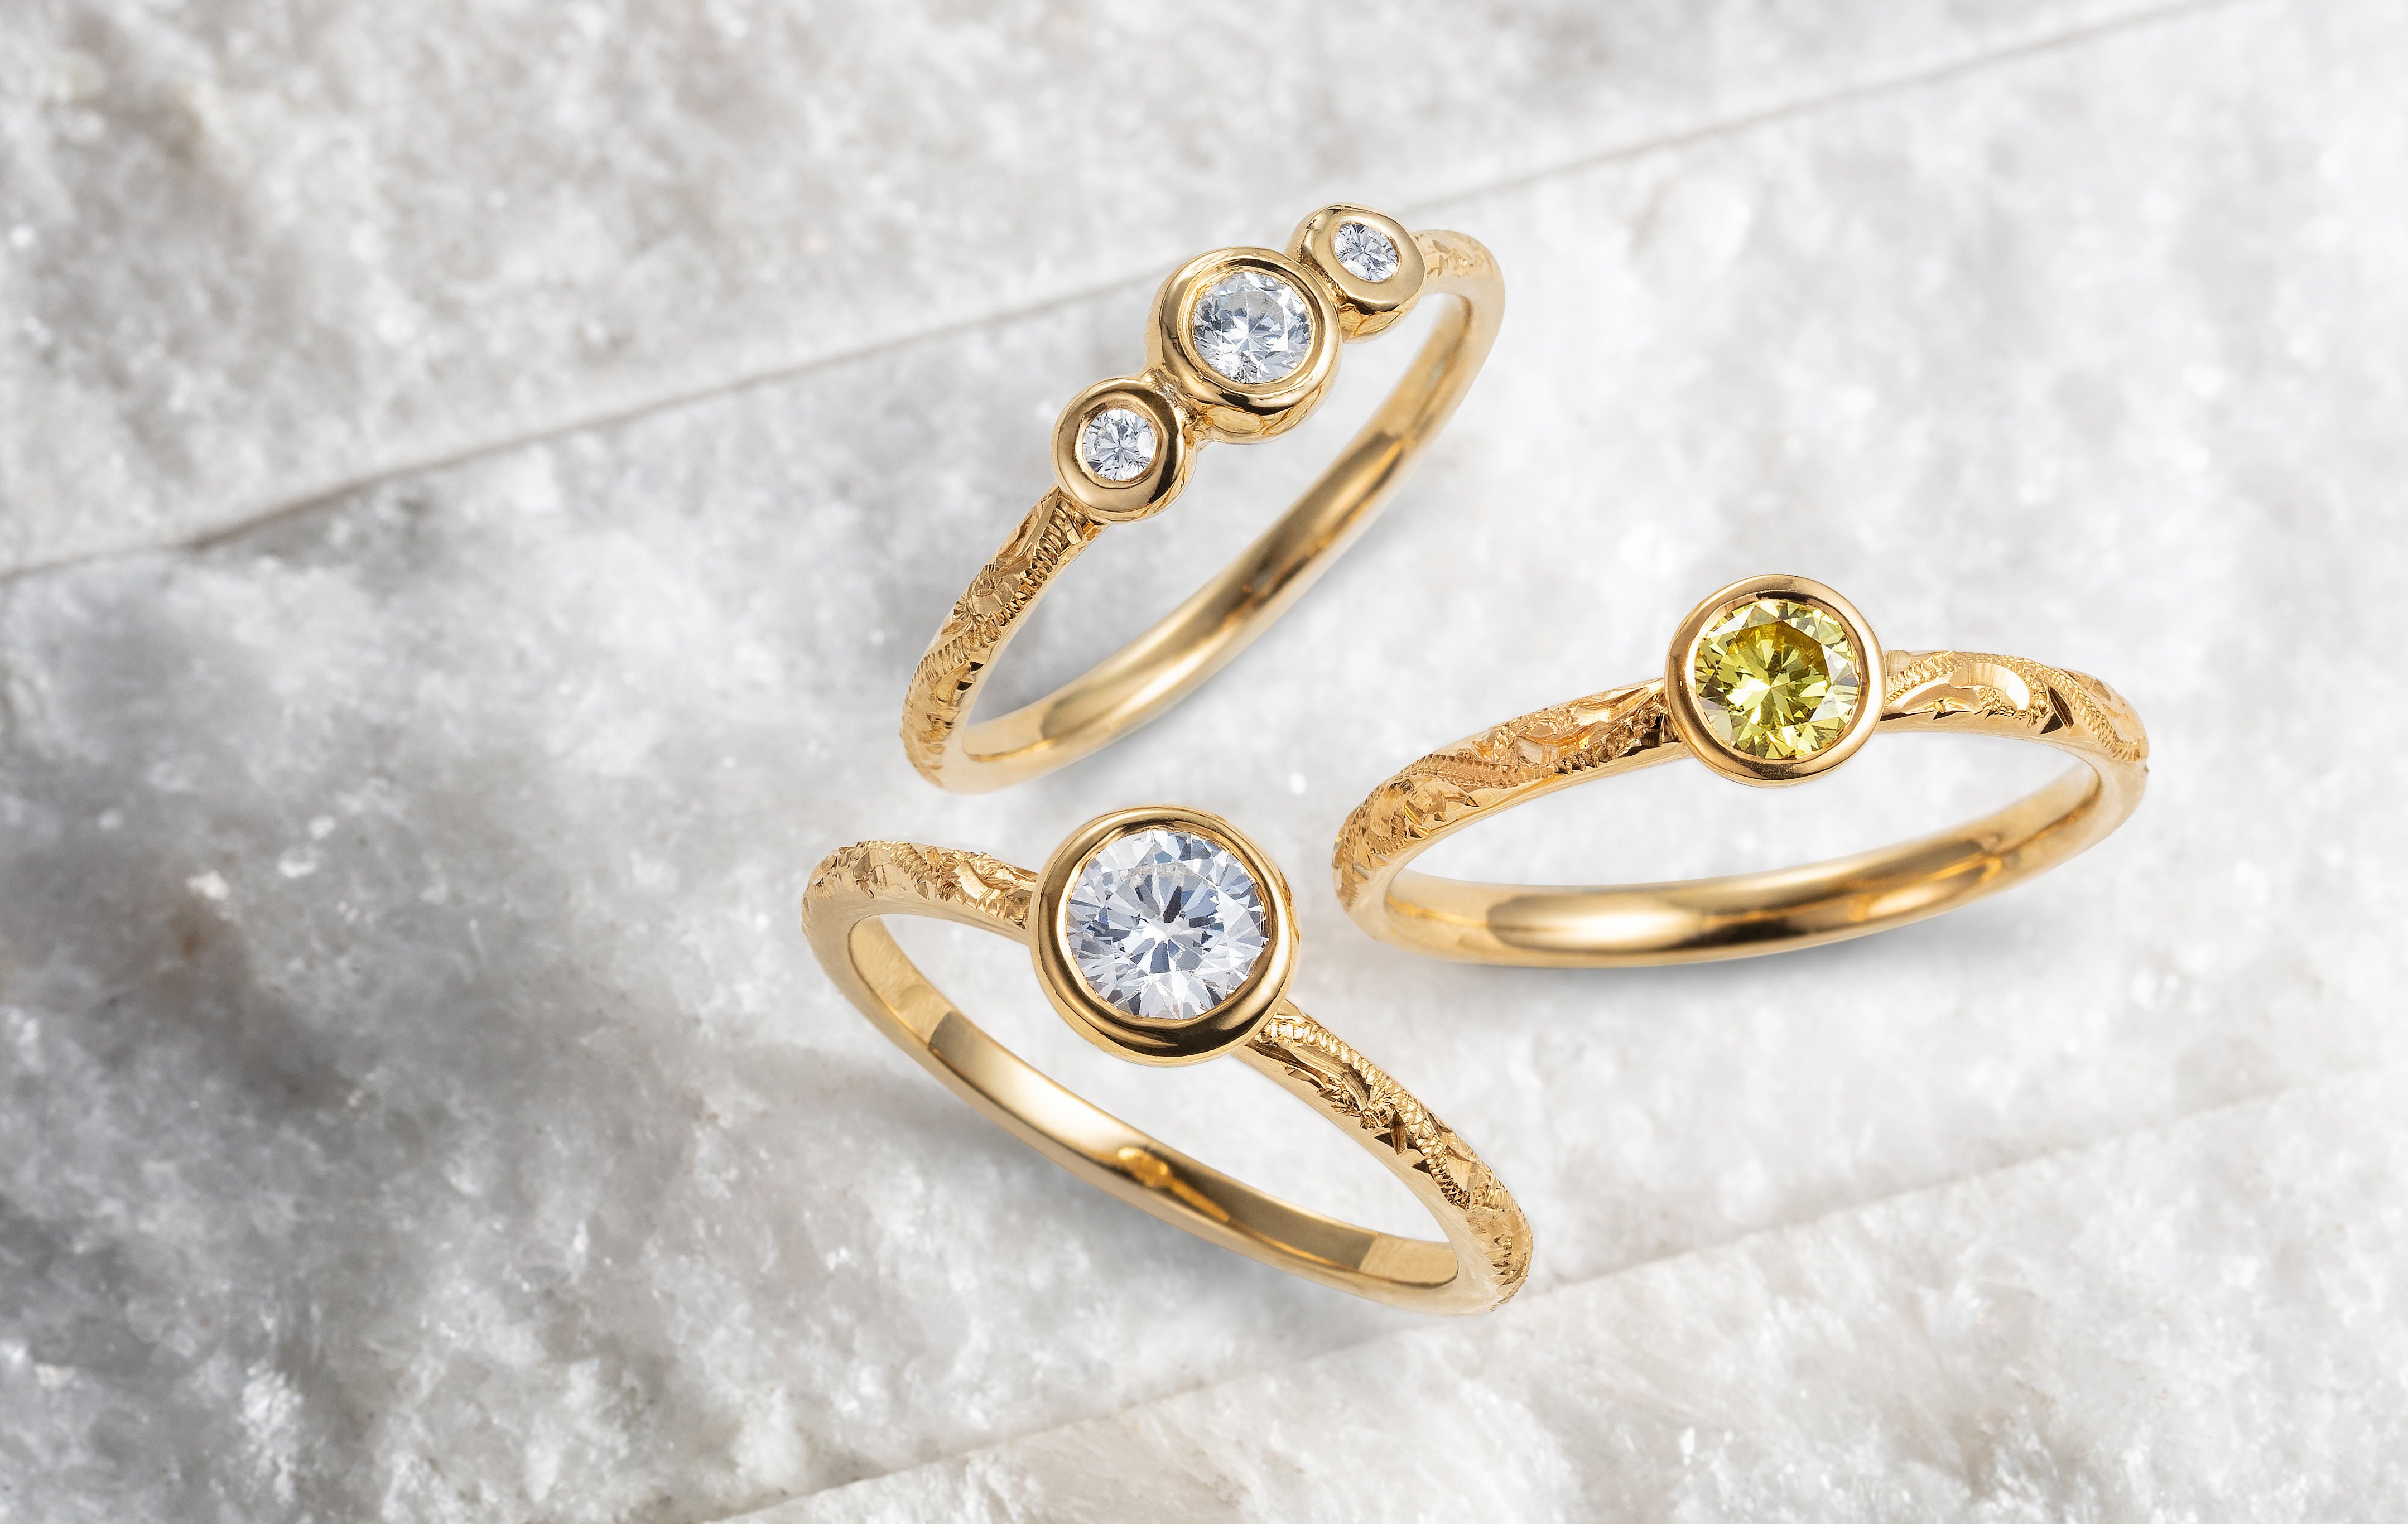 Arabel Lebrusan's Hera Collection, traceable sapphires and diamonds on ethical gold